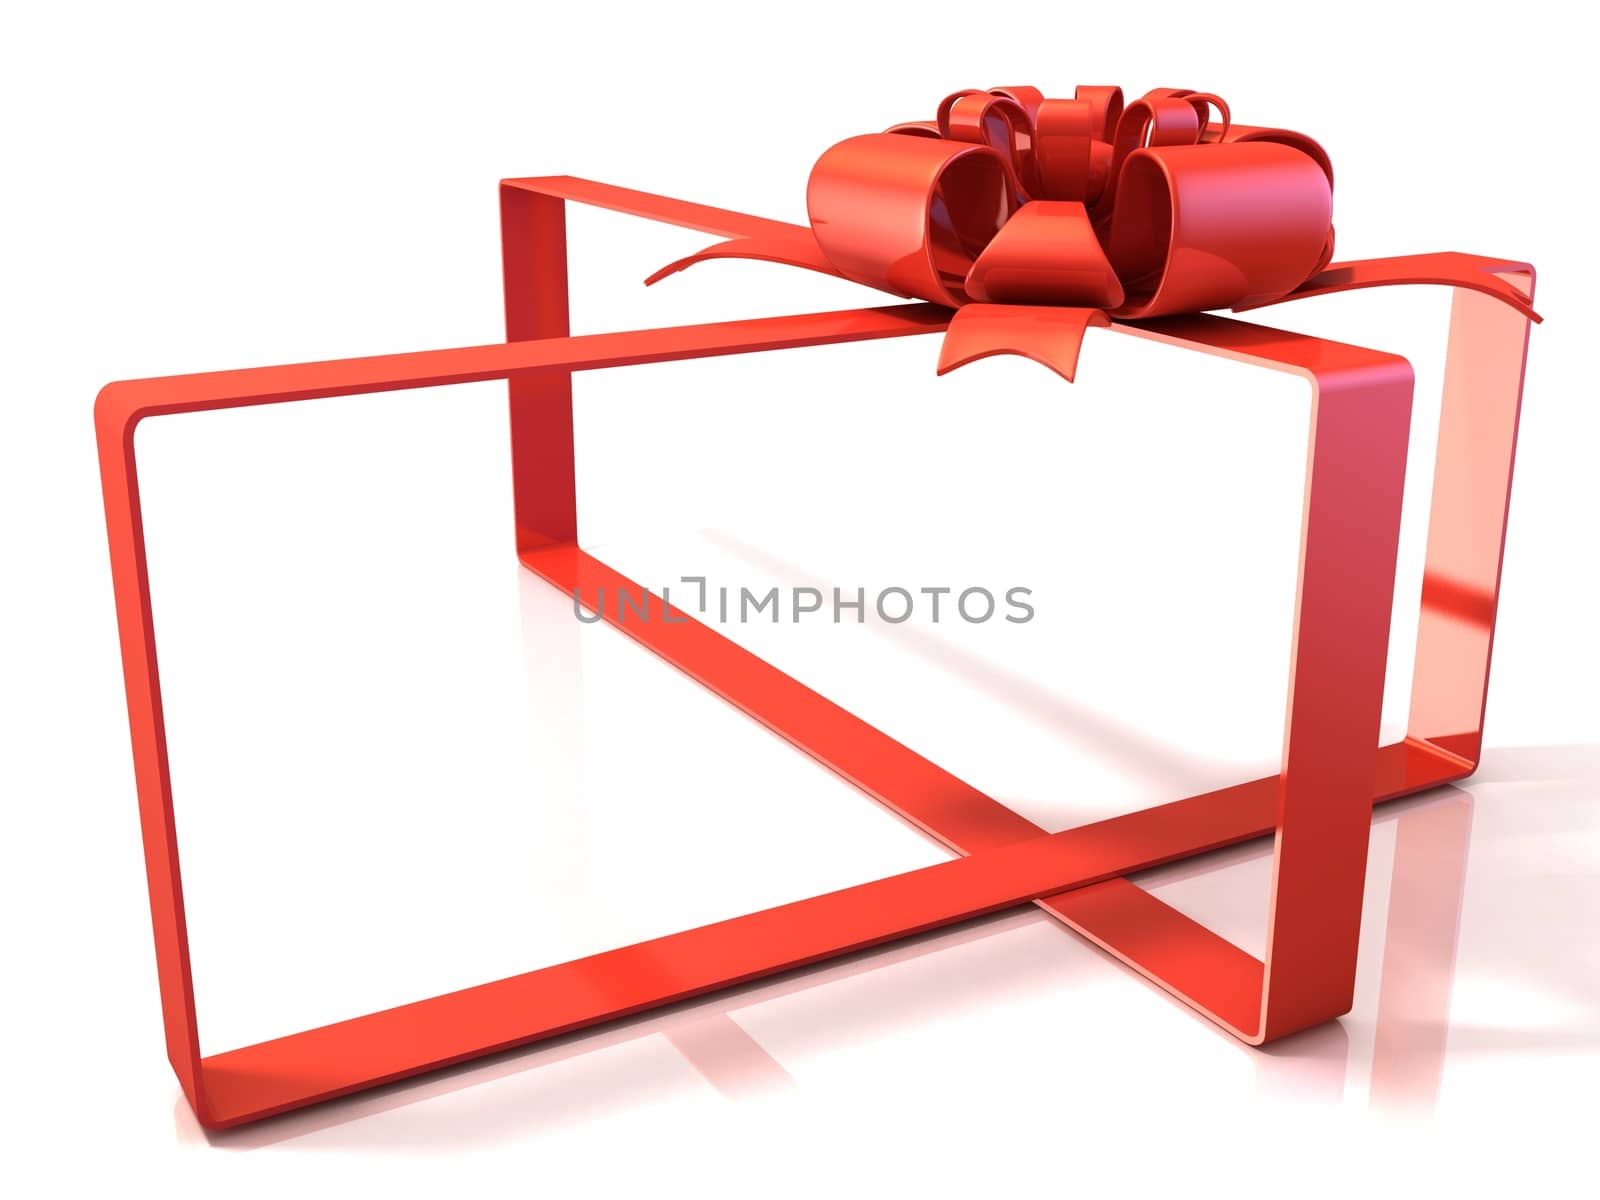 Festive gift ribbon and bow, box shaped, 3D rendering isolated on white. Copy space